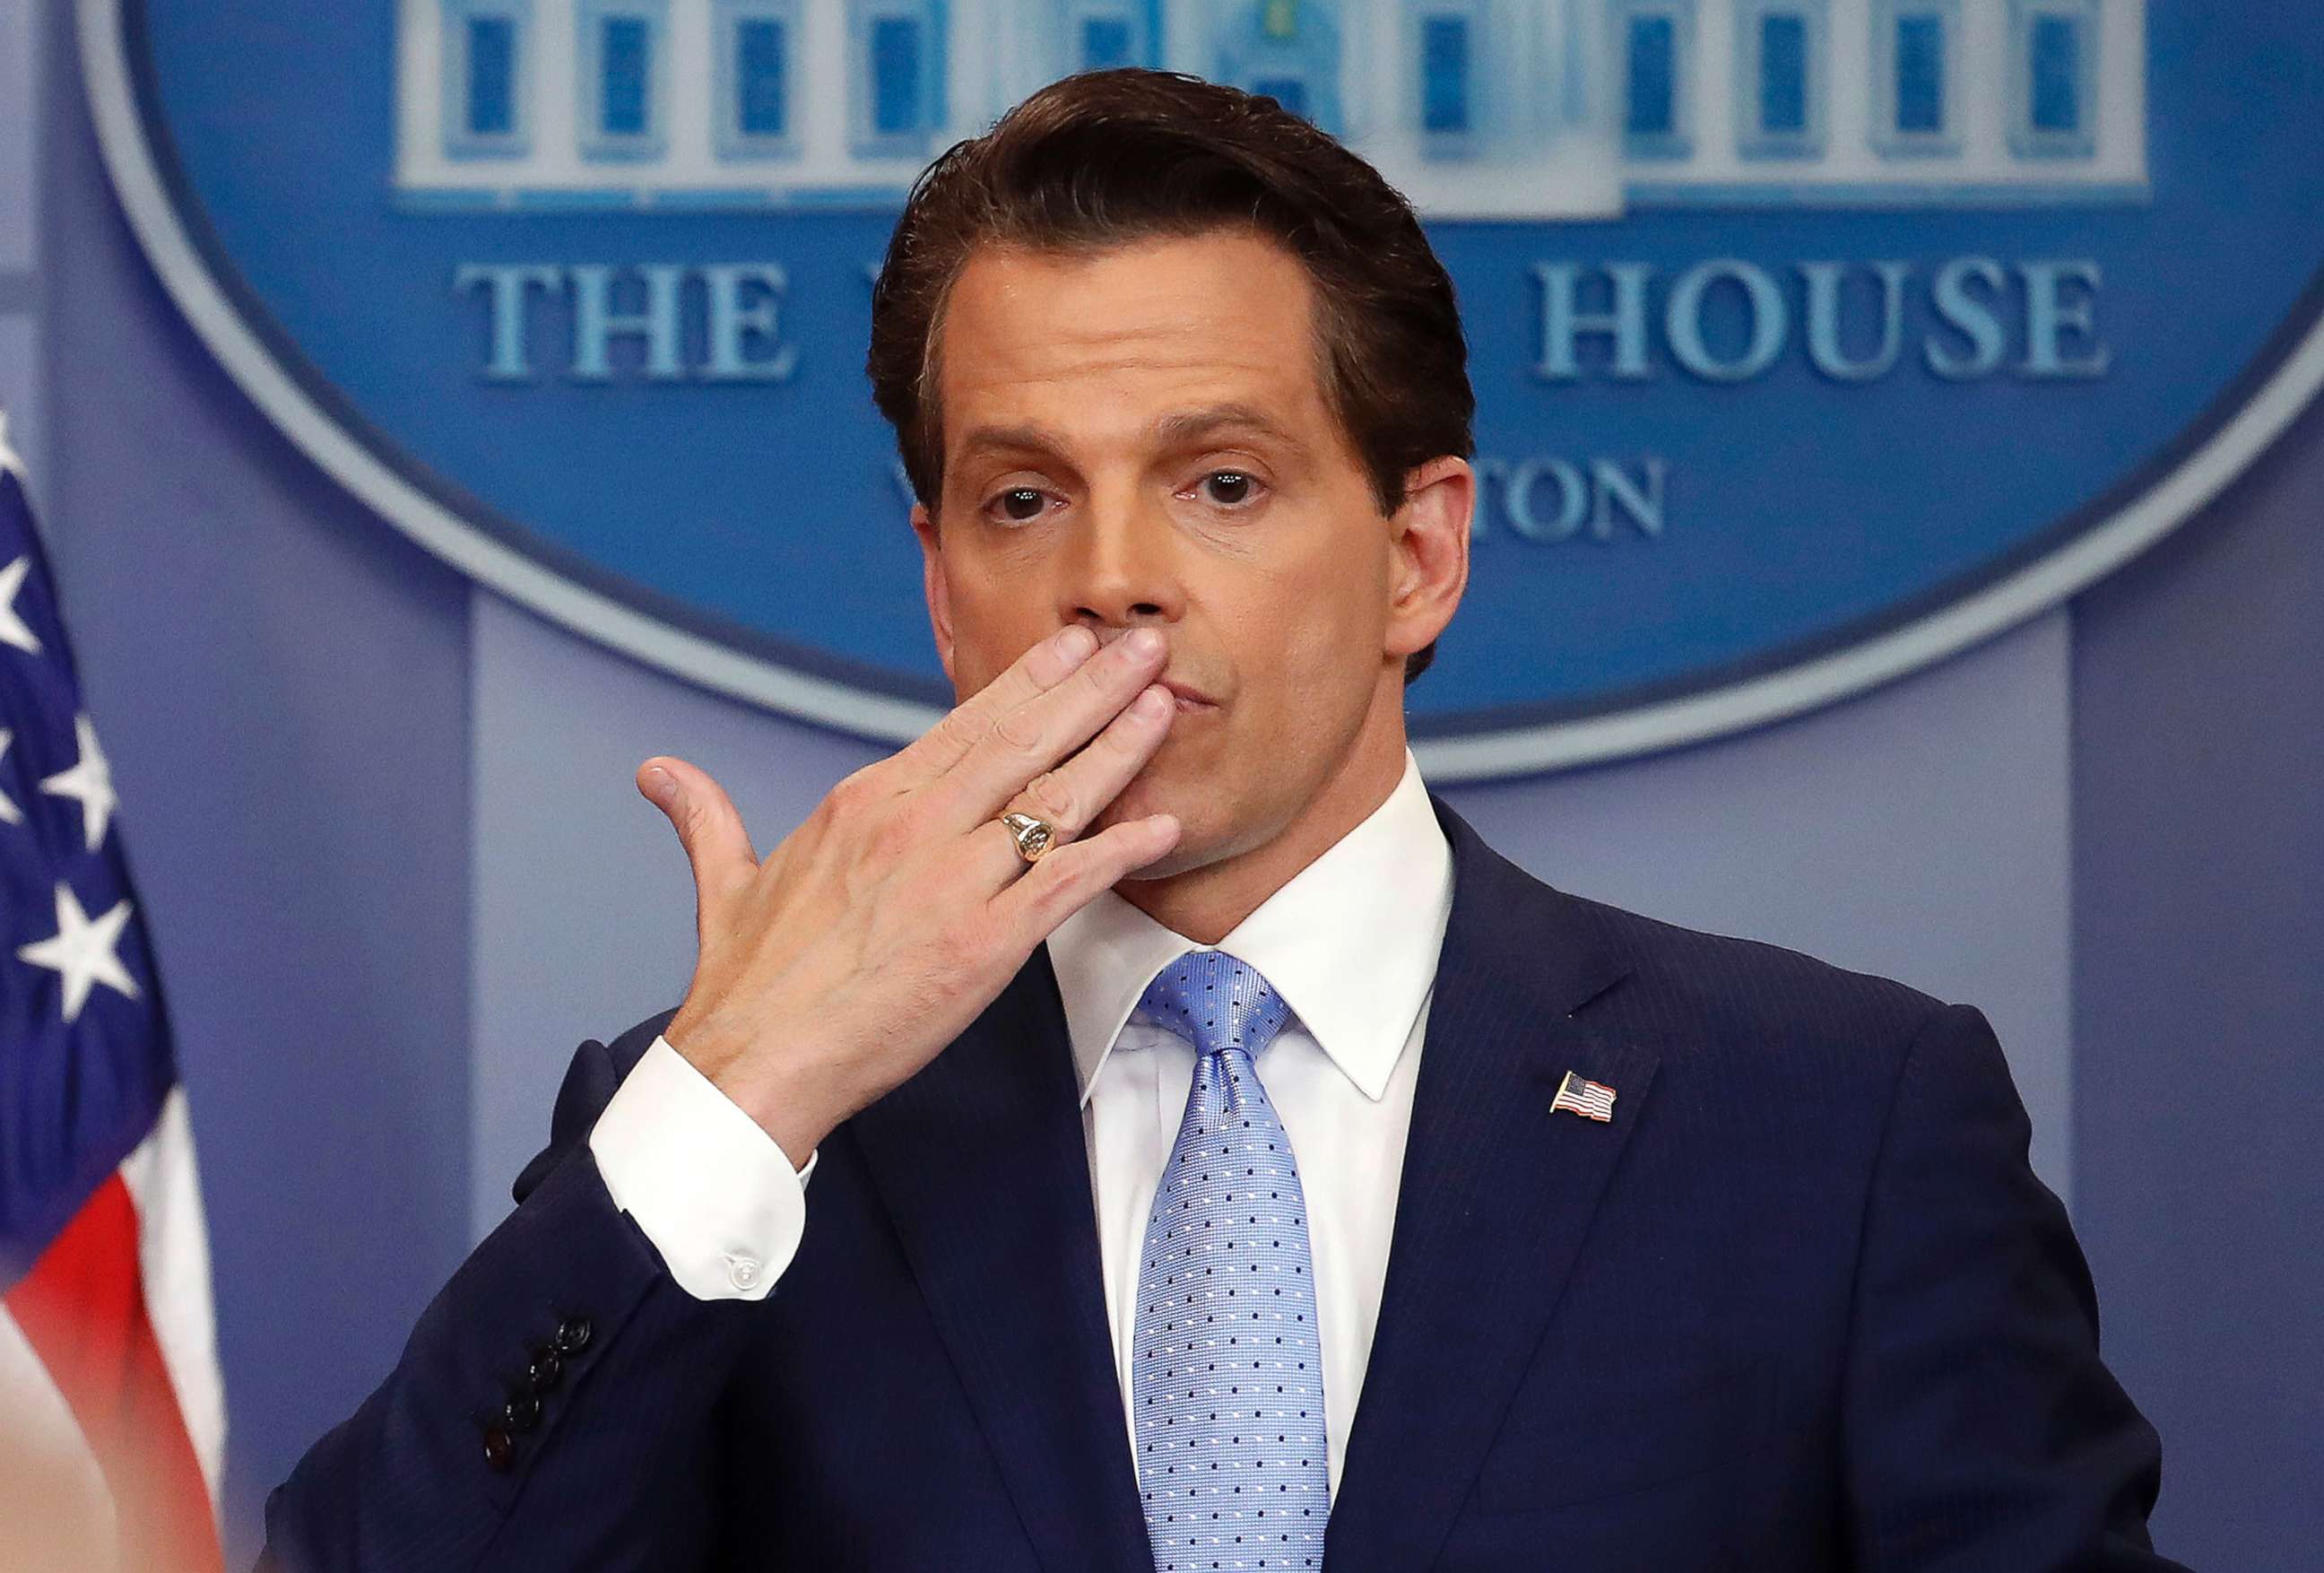 PHOTO: Incoming White House communications director Anthony Scaramucci, right, blowing a kiss after answering questions during the press briefing in the Brady Press Briefing room of the White House in Washington, July 21, 2017.